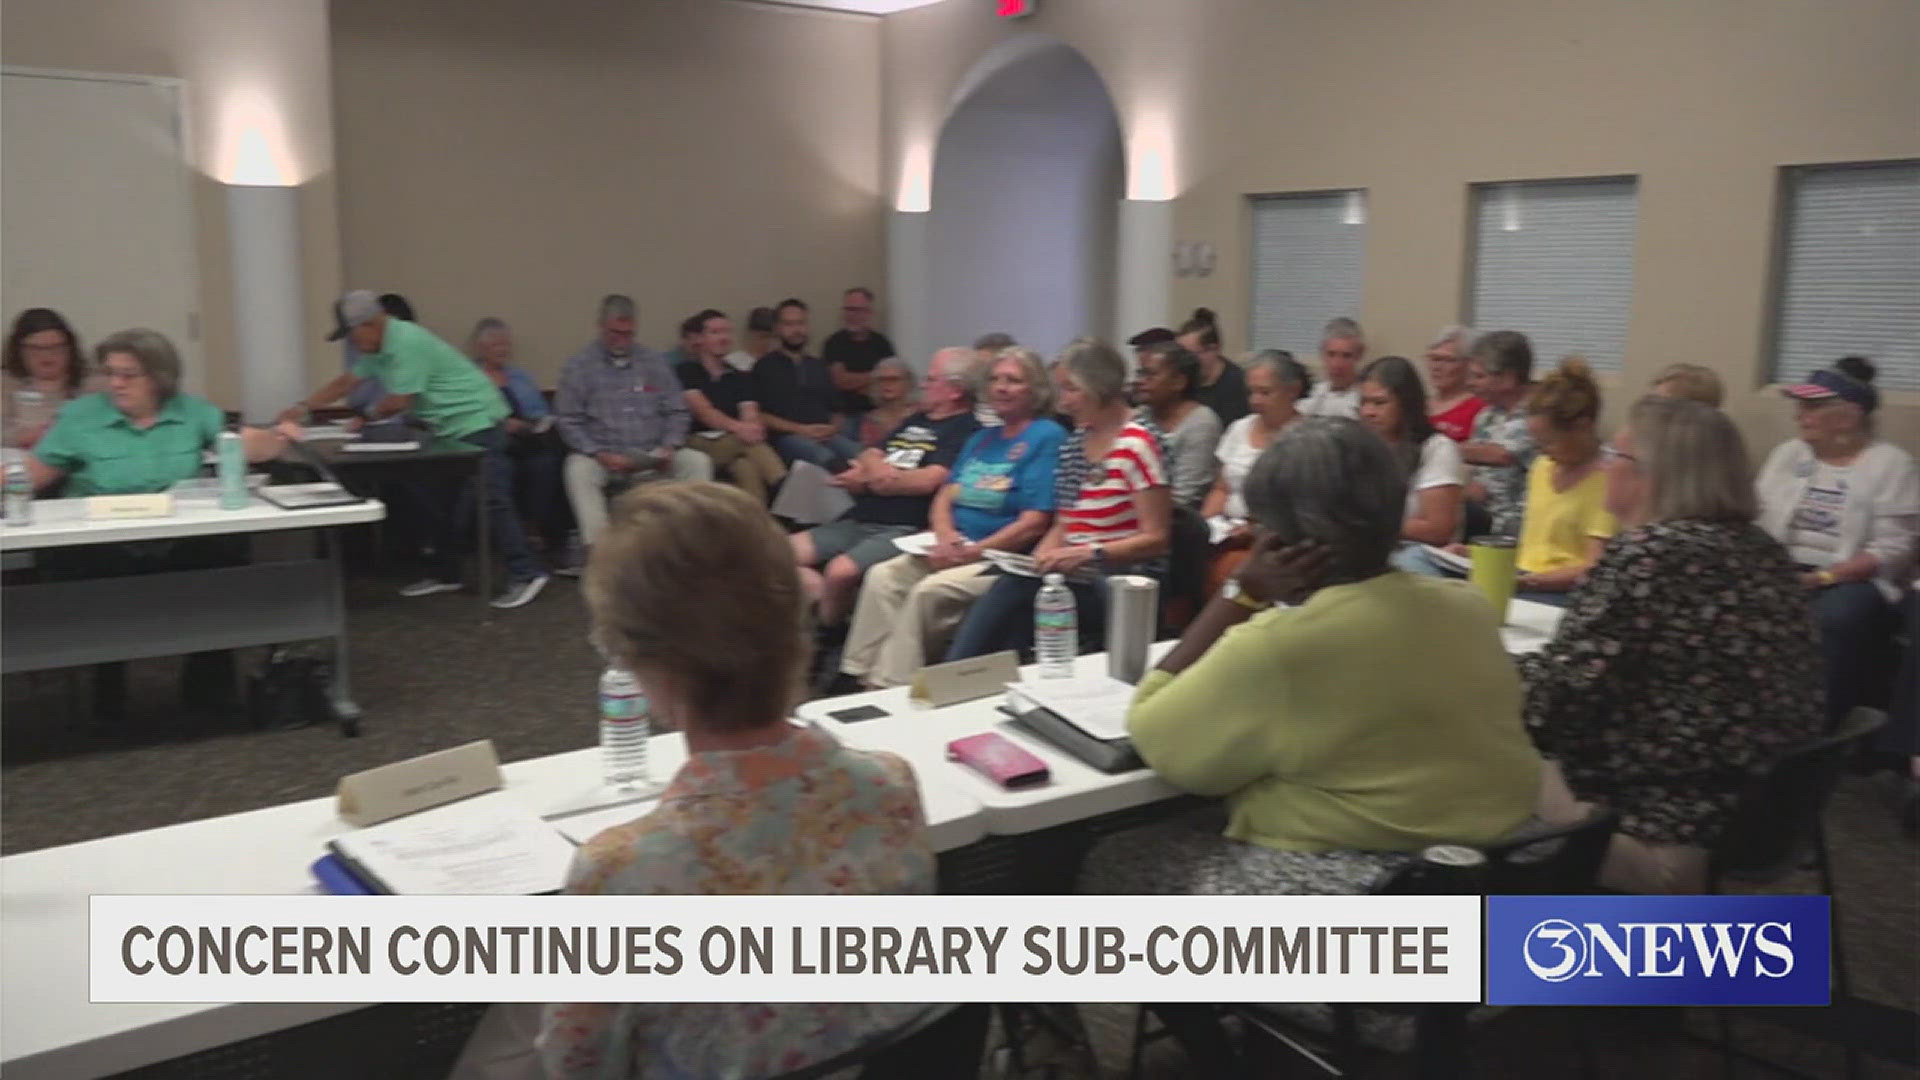 There was no action on the agenda other than hearing an update on the subcommittee's efforts, but residents debated access and selection at our public libraries.